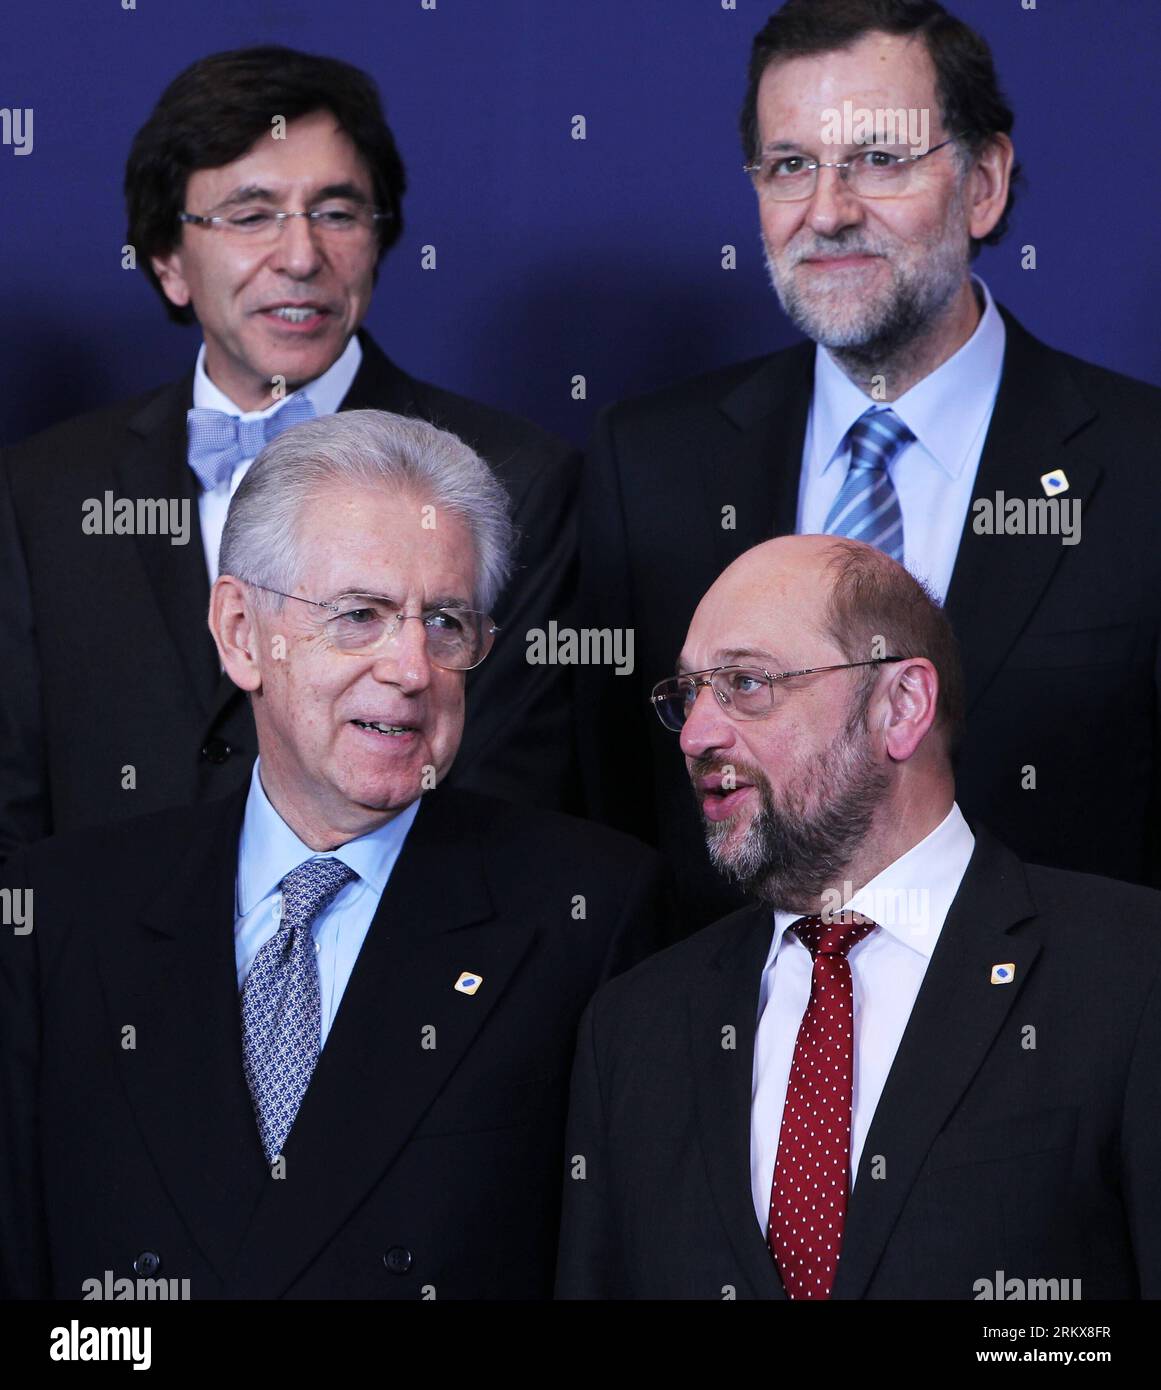 Bildnummer: 58916667  Datum: 13.12.2012  Copyright: imago/Xinhua (121213) -- BRUSSELS, Dec. 13, 2012 (Xinhua) -- Italian Prime Minister Mario Monti(L, front),President of European Parliament Martin Schulz(R, front),Belgian Prime Minister Elio Di Rupo(L, back), Spanish Prime Minister Mariano Rajoy pose for family photos during an EU Summit meeting at EU s headquarters in Brussels, capital of Belgium, on Dec. 13, 2012. European leaders are expected to focus on a blueprint calling for building a deep and genuine Economic and Monetary Union (EMU) during the summit on Thursday and Friday. (Xinhua/G Stock Photo